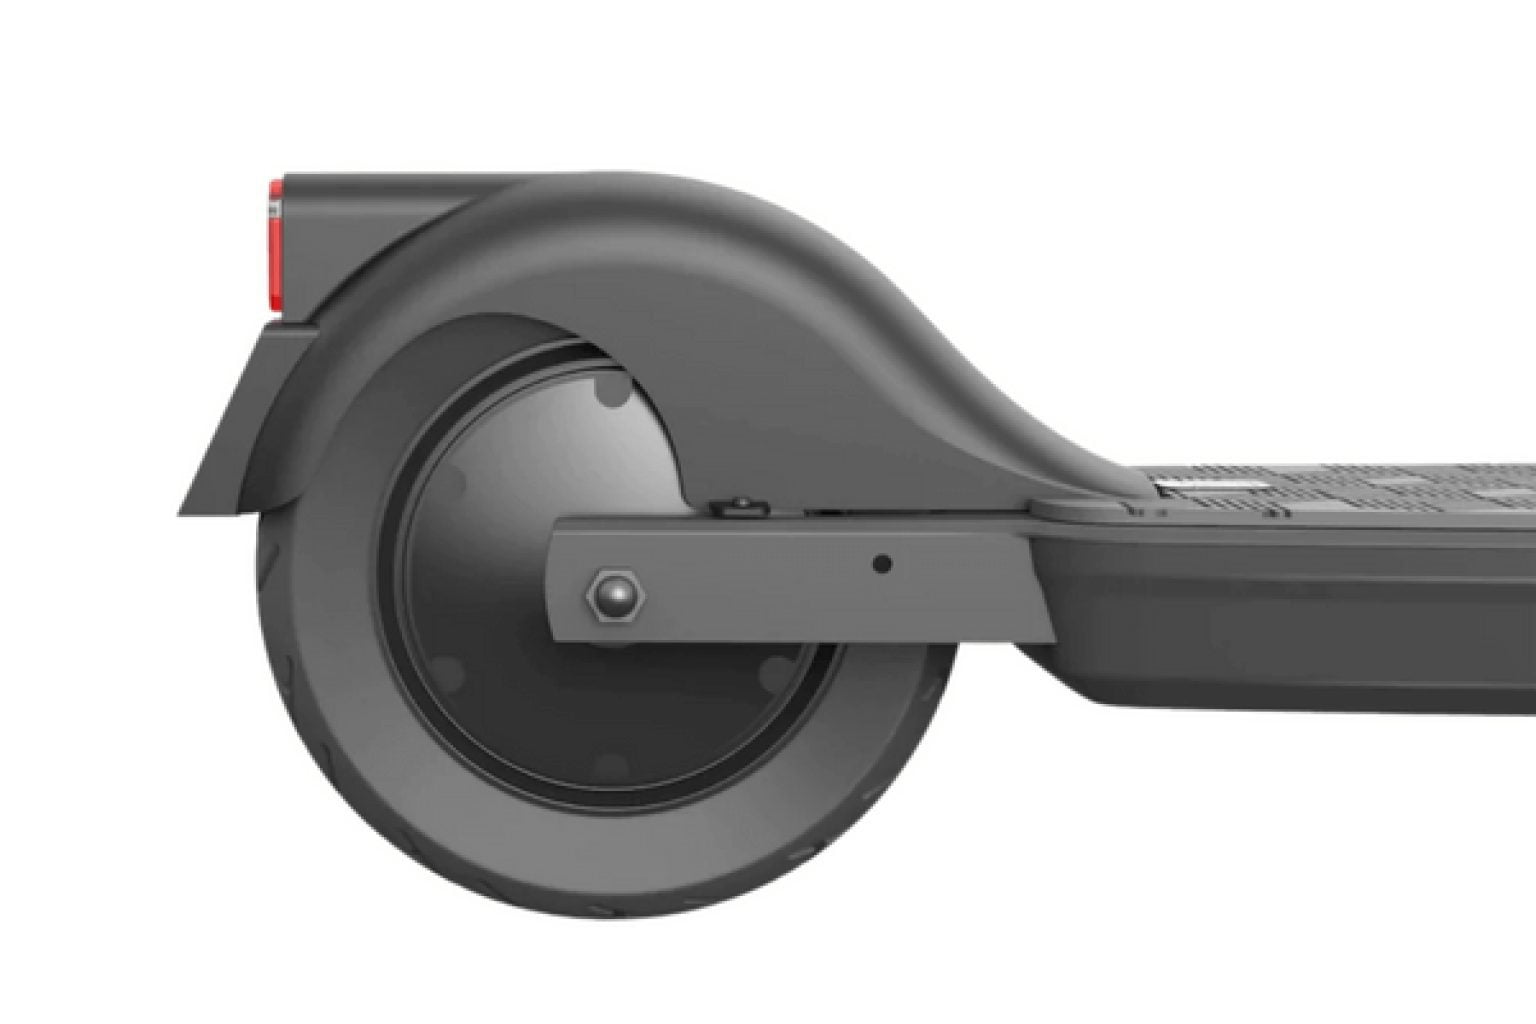 Apollo Air A Review of Apollo's Cheapest Scooter